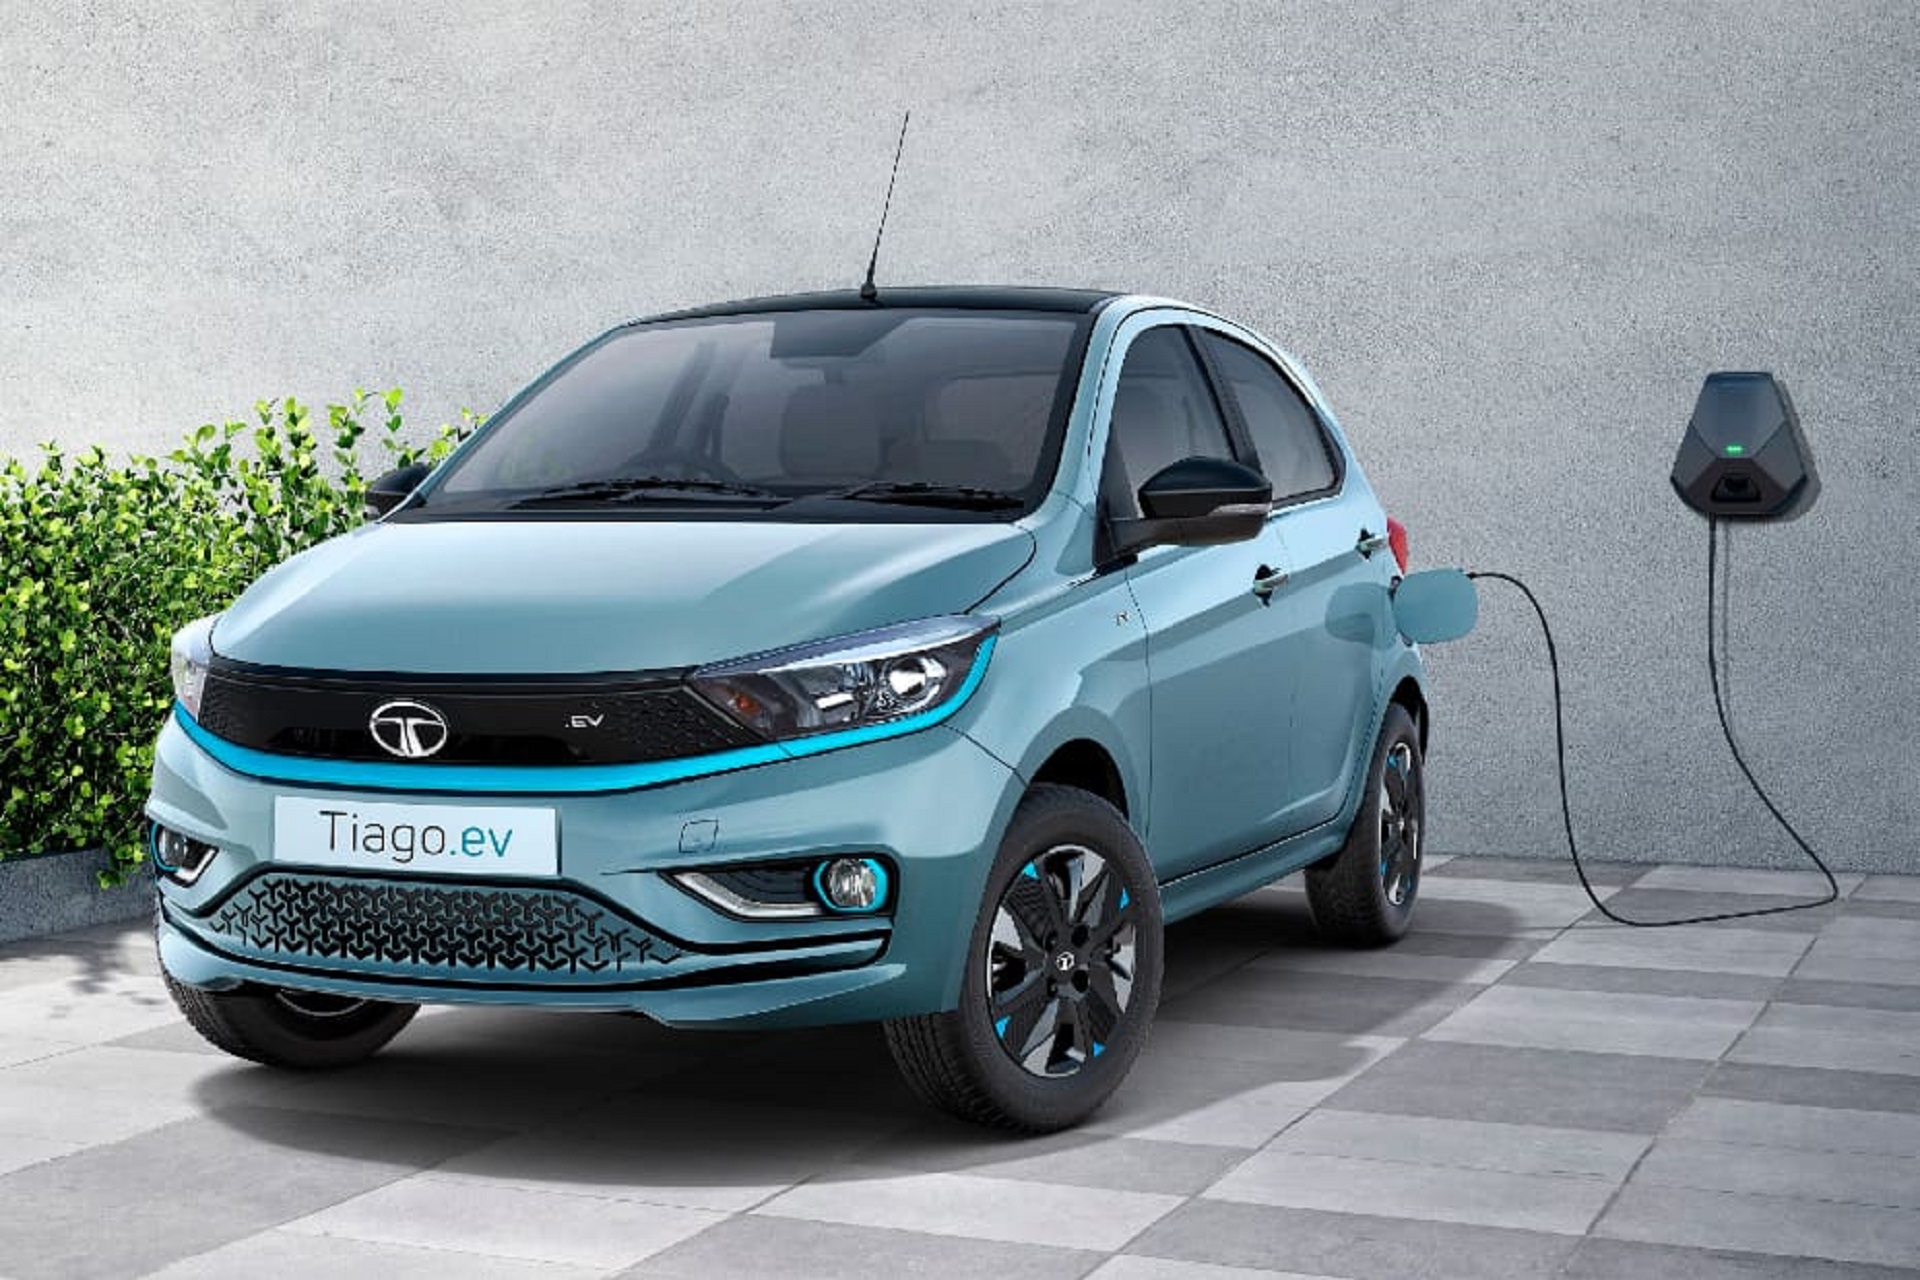 New Tata Tiago EV- Most Affordable Electric Car In India That Runs 300KM On Single Charge